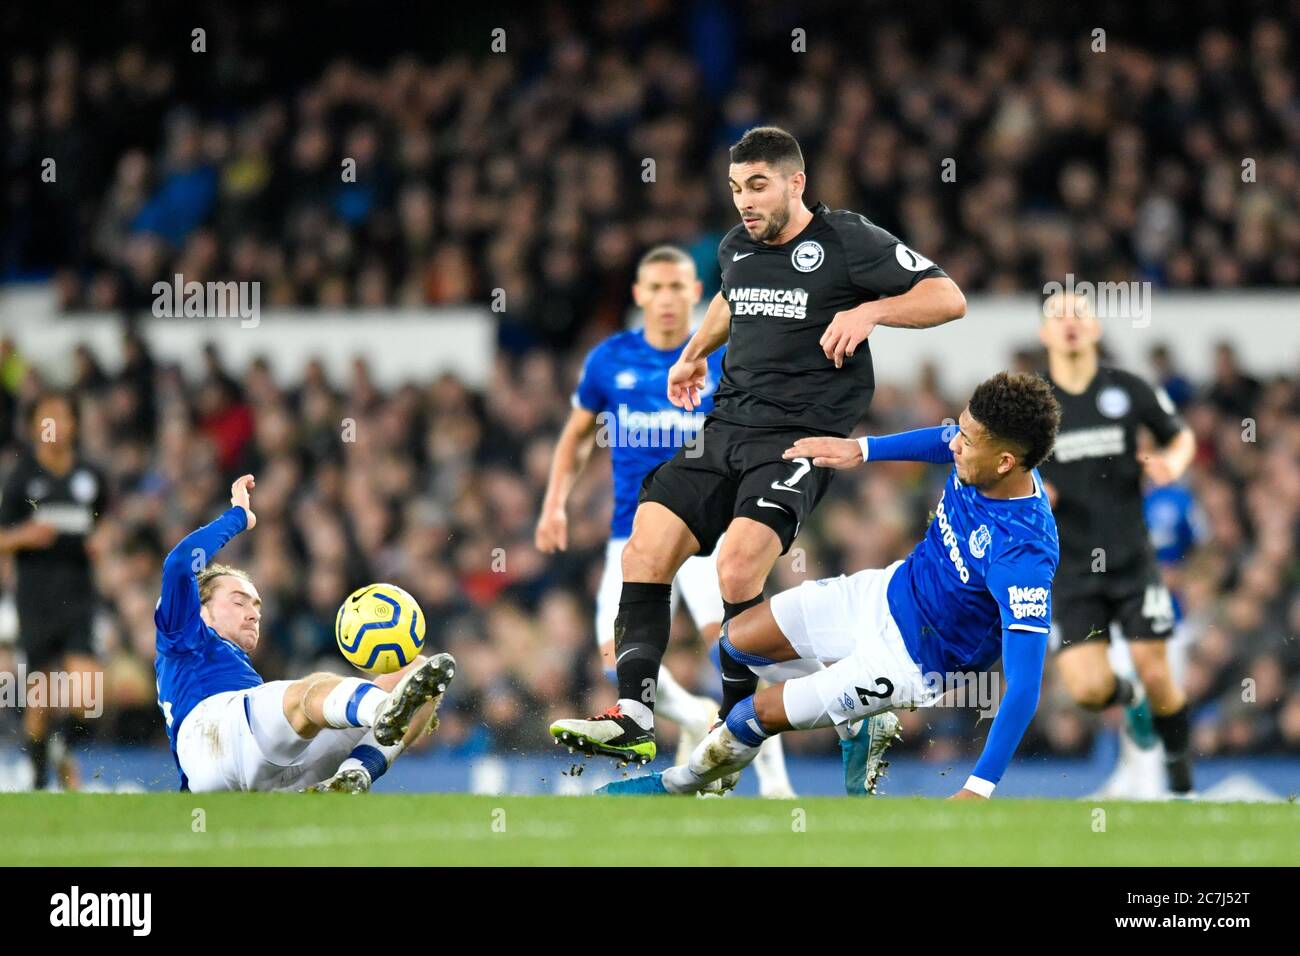 11th January 2020, Goodison Park, Liverpool, England; Premier League, Everton v Brighton and Hove Albion : Neal Maupay (7) of Brighton and Hove Albion attempts to avoid the sliding tackles from Tom Davies (26) and Mason Holgate (2) of Everton Credit: Simon Whitehead/News Images Stock Photo